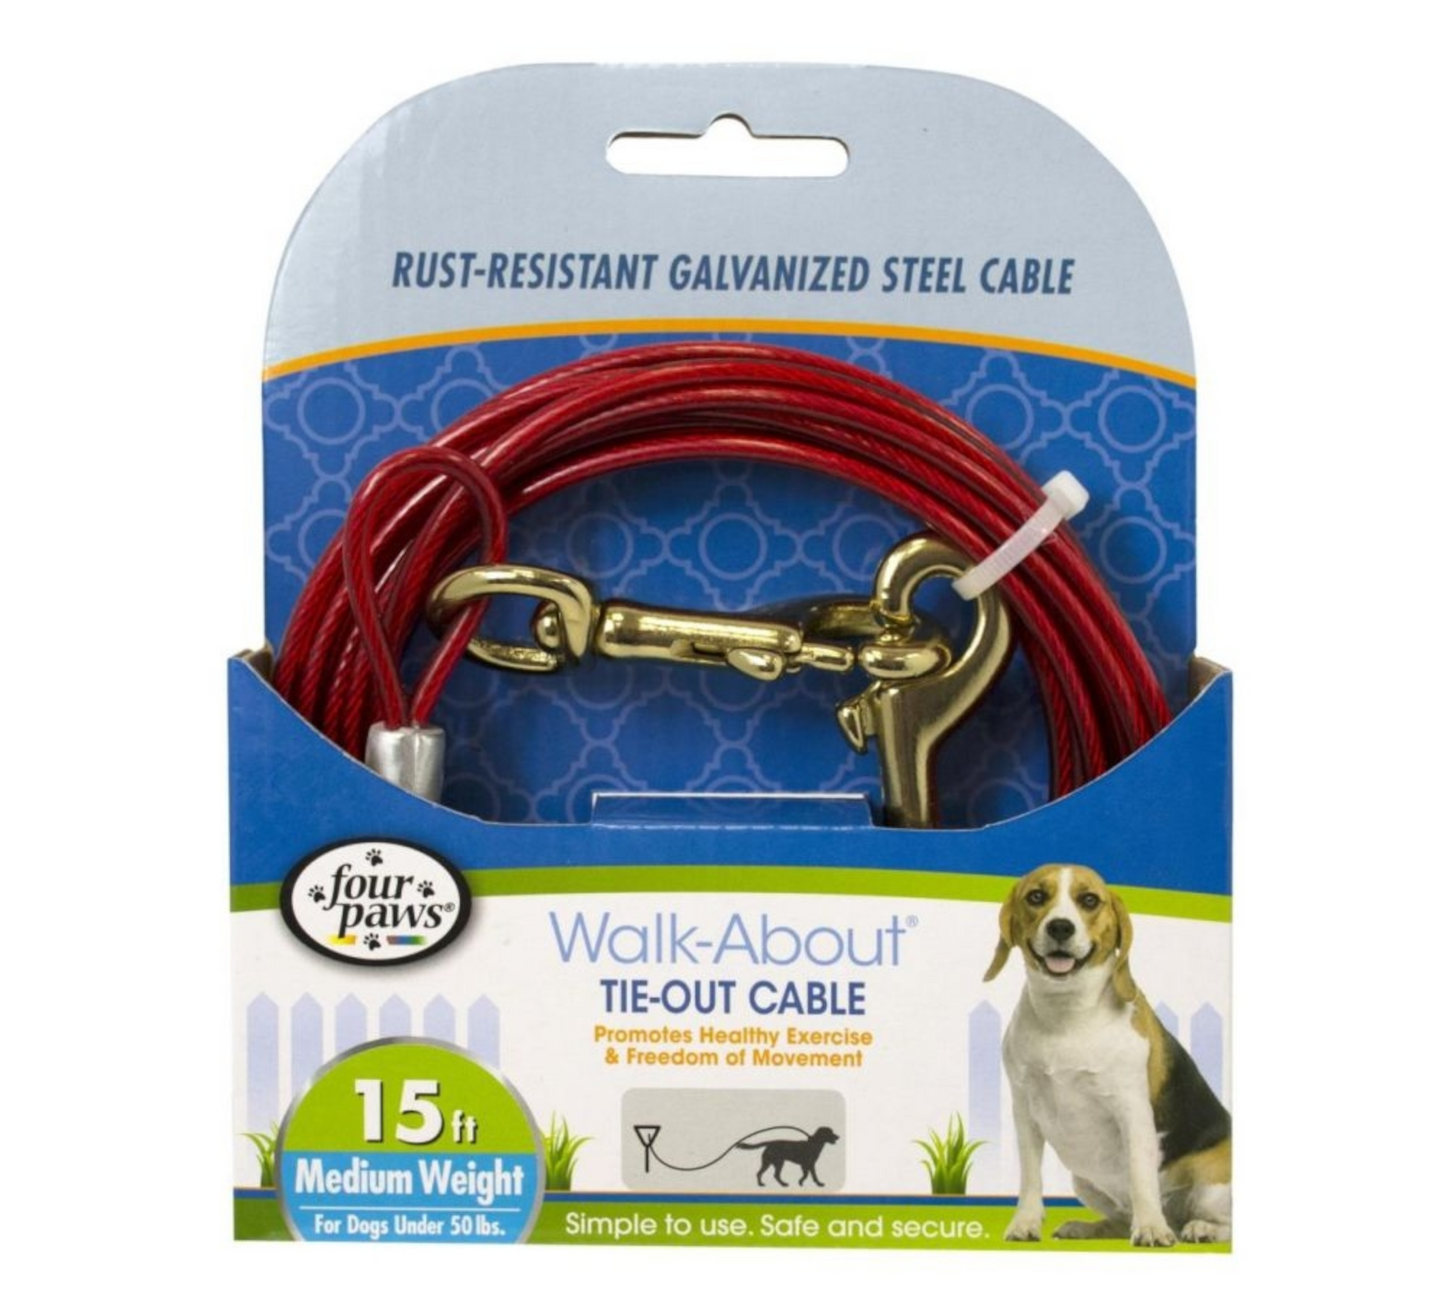 Canine's World Dog Tie Out Cables Four Paws Medium Weight Tie Out Cable Four Paws